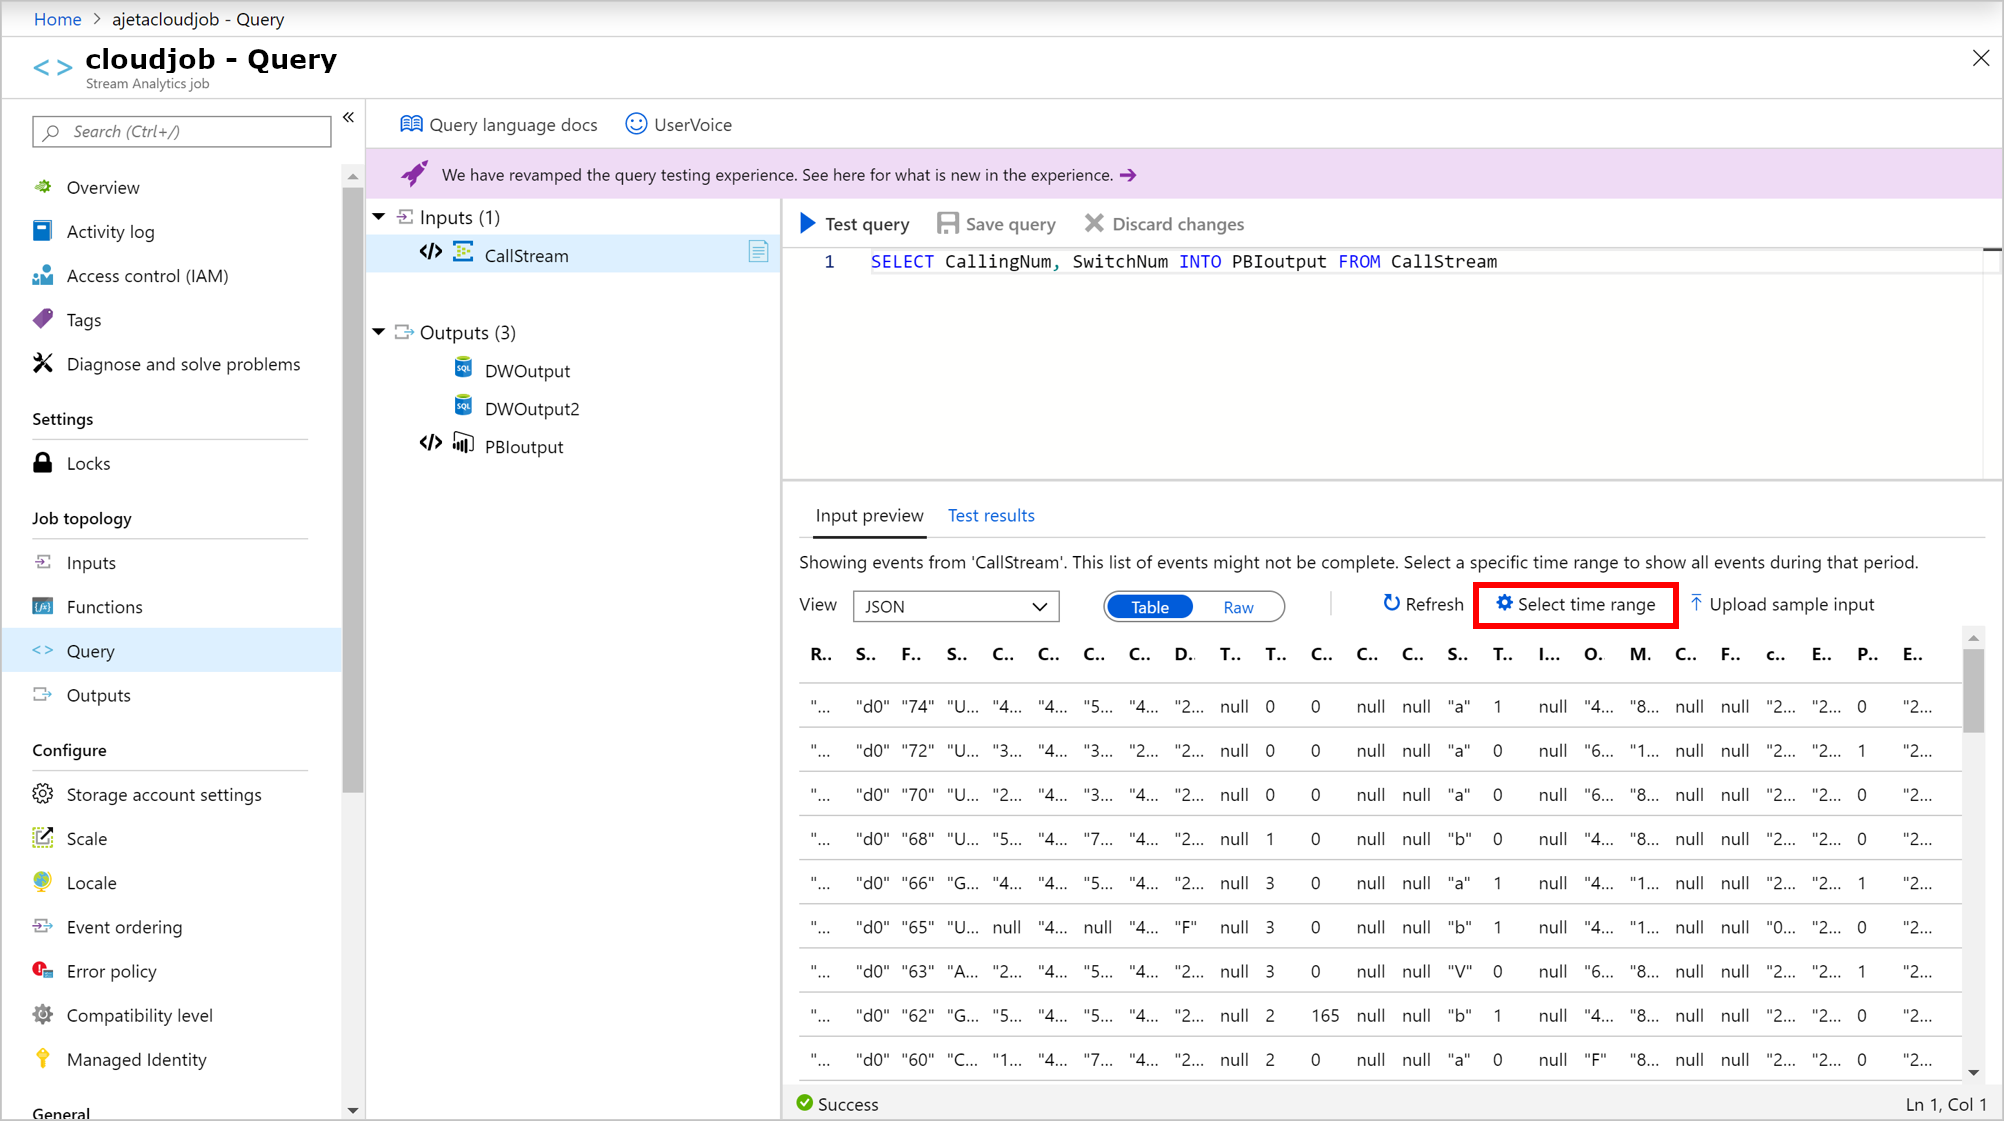 Azure Stream Analytics time range for incoming sample events